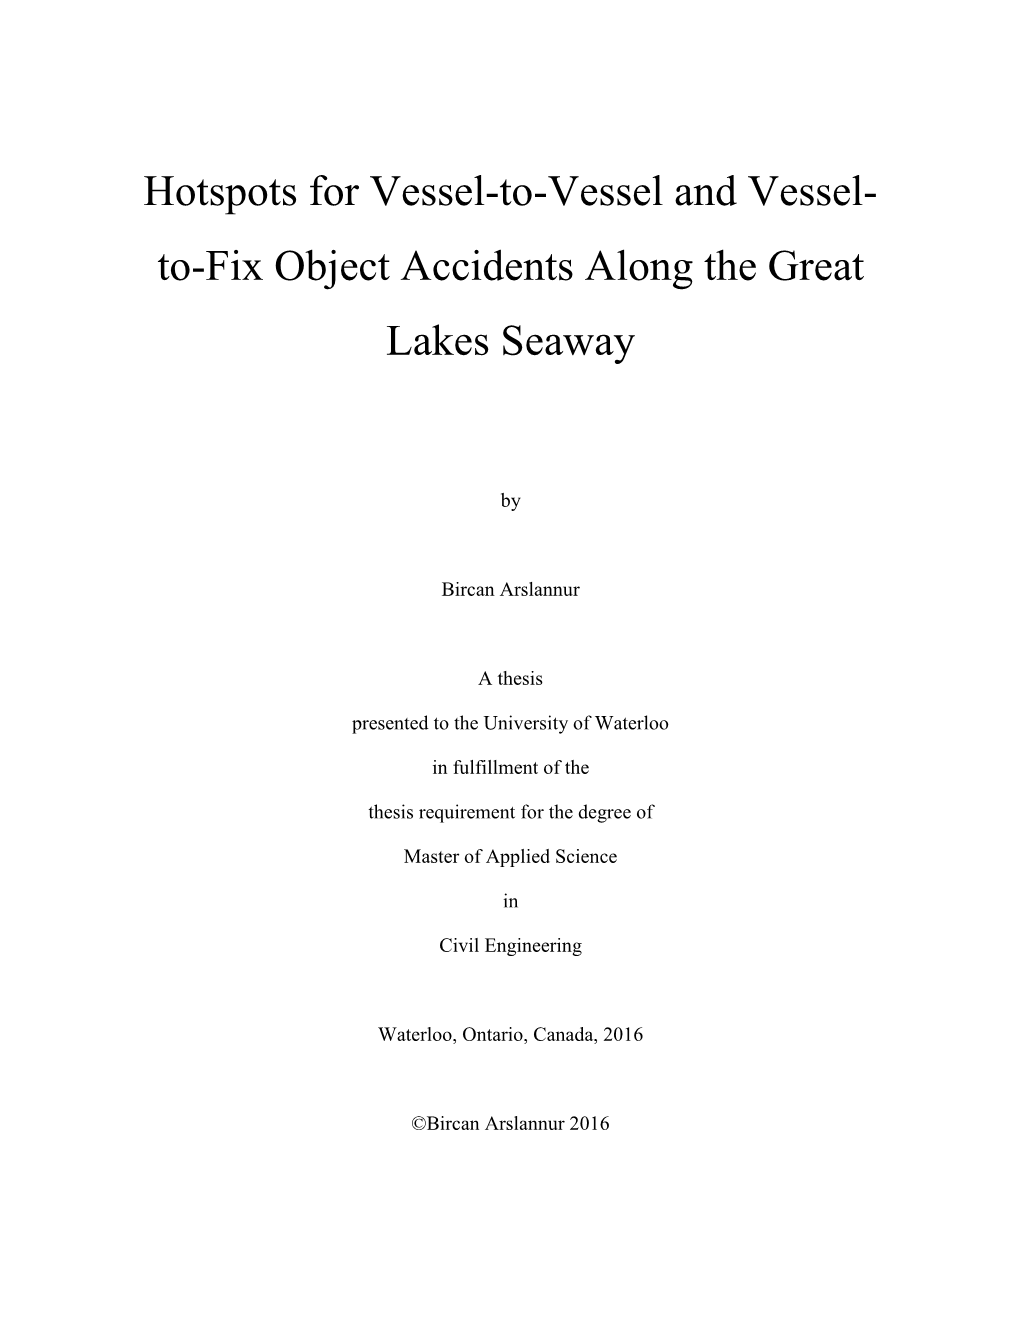 Hotspots for Vessel-To-Vessel and Vessel-To-Fix Object Accidents